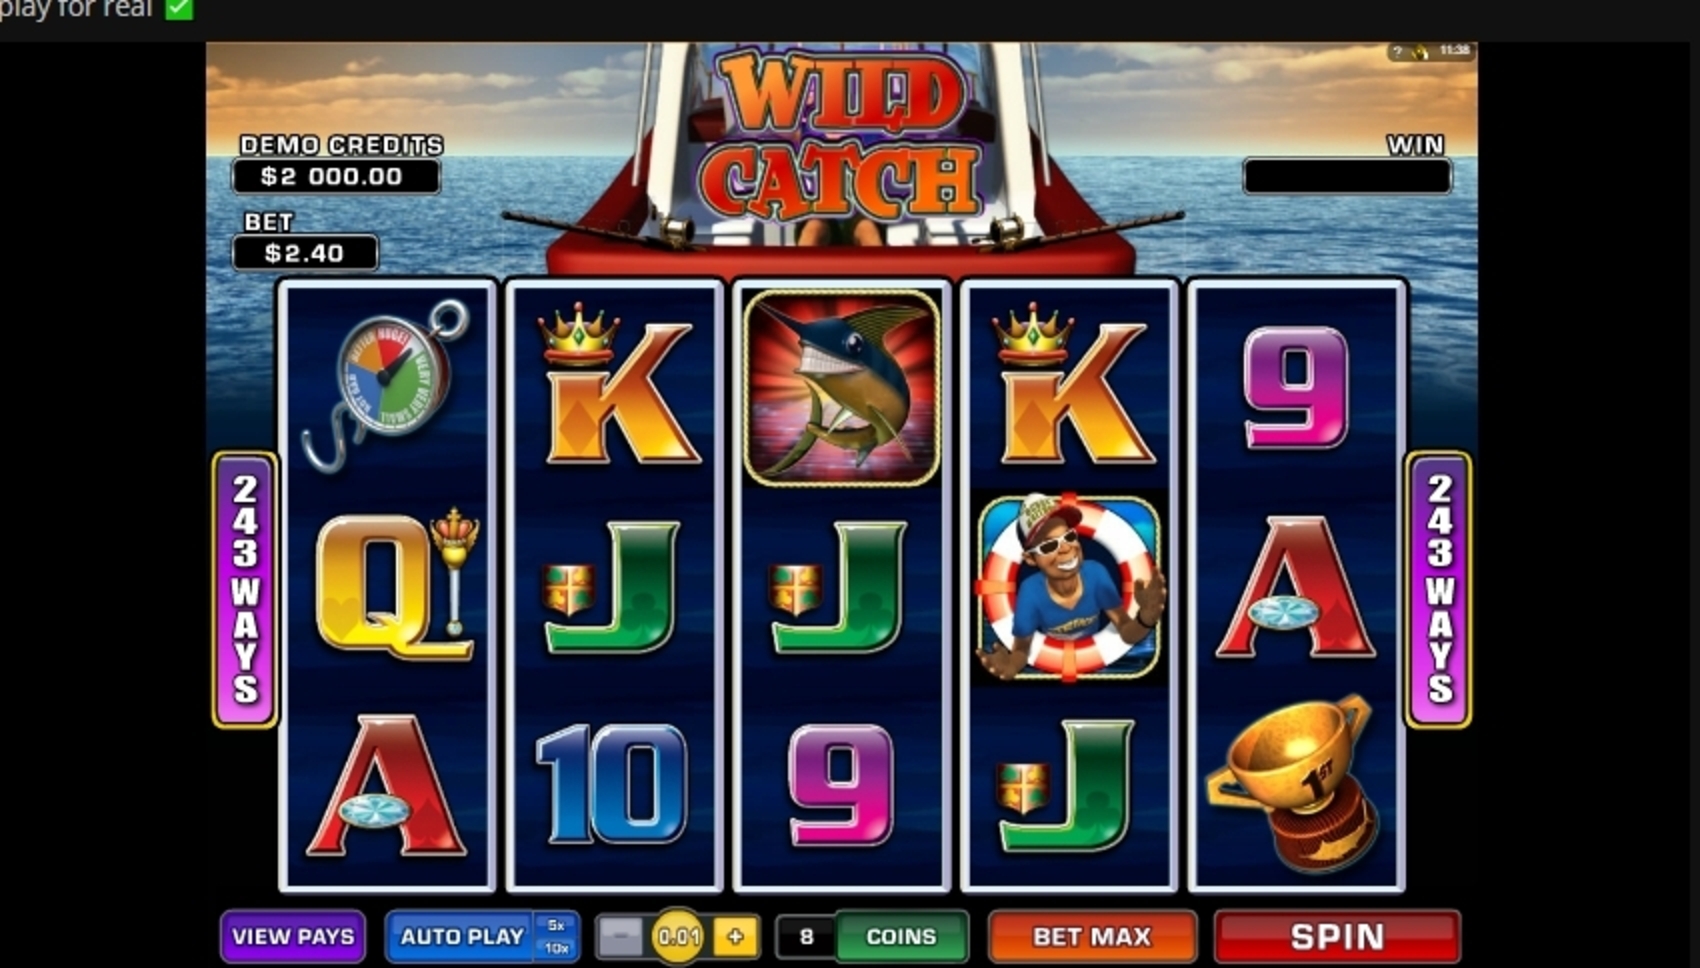 Reels in Wild Catch Slot Game by Microgaming